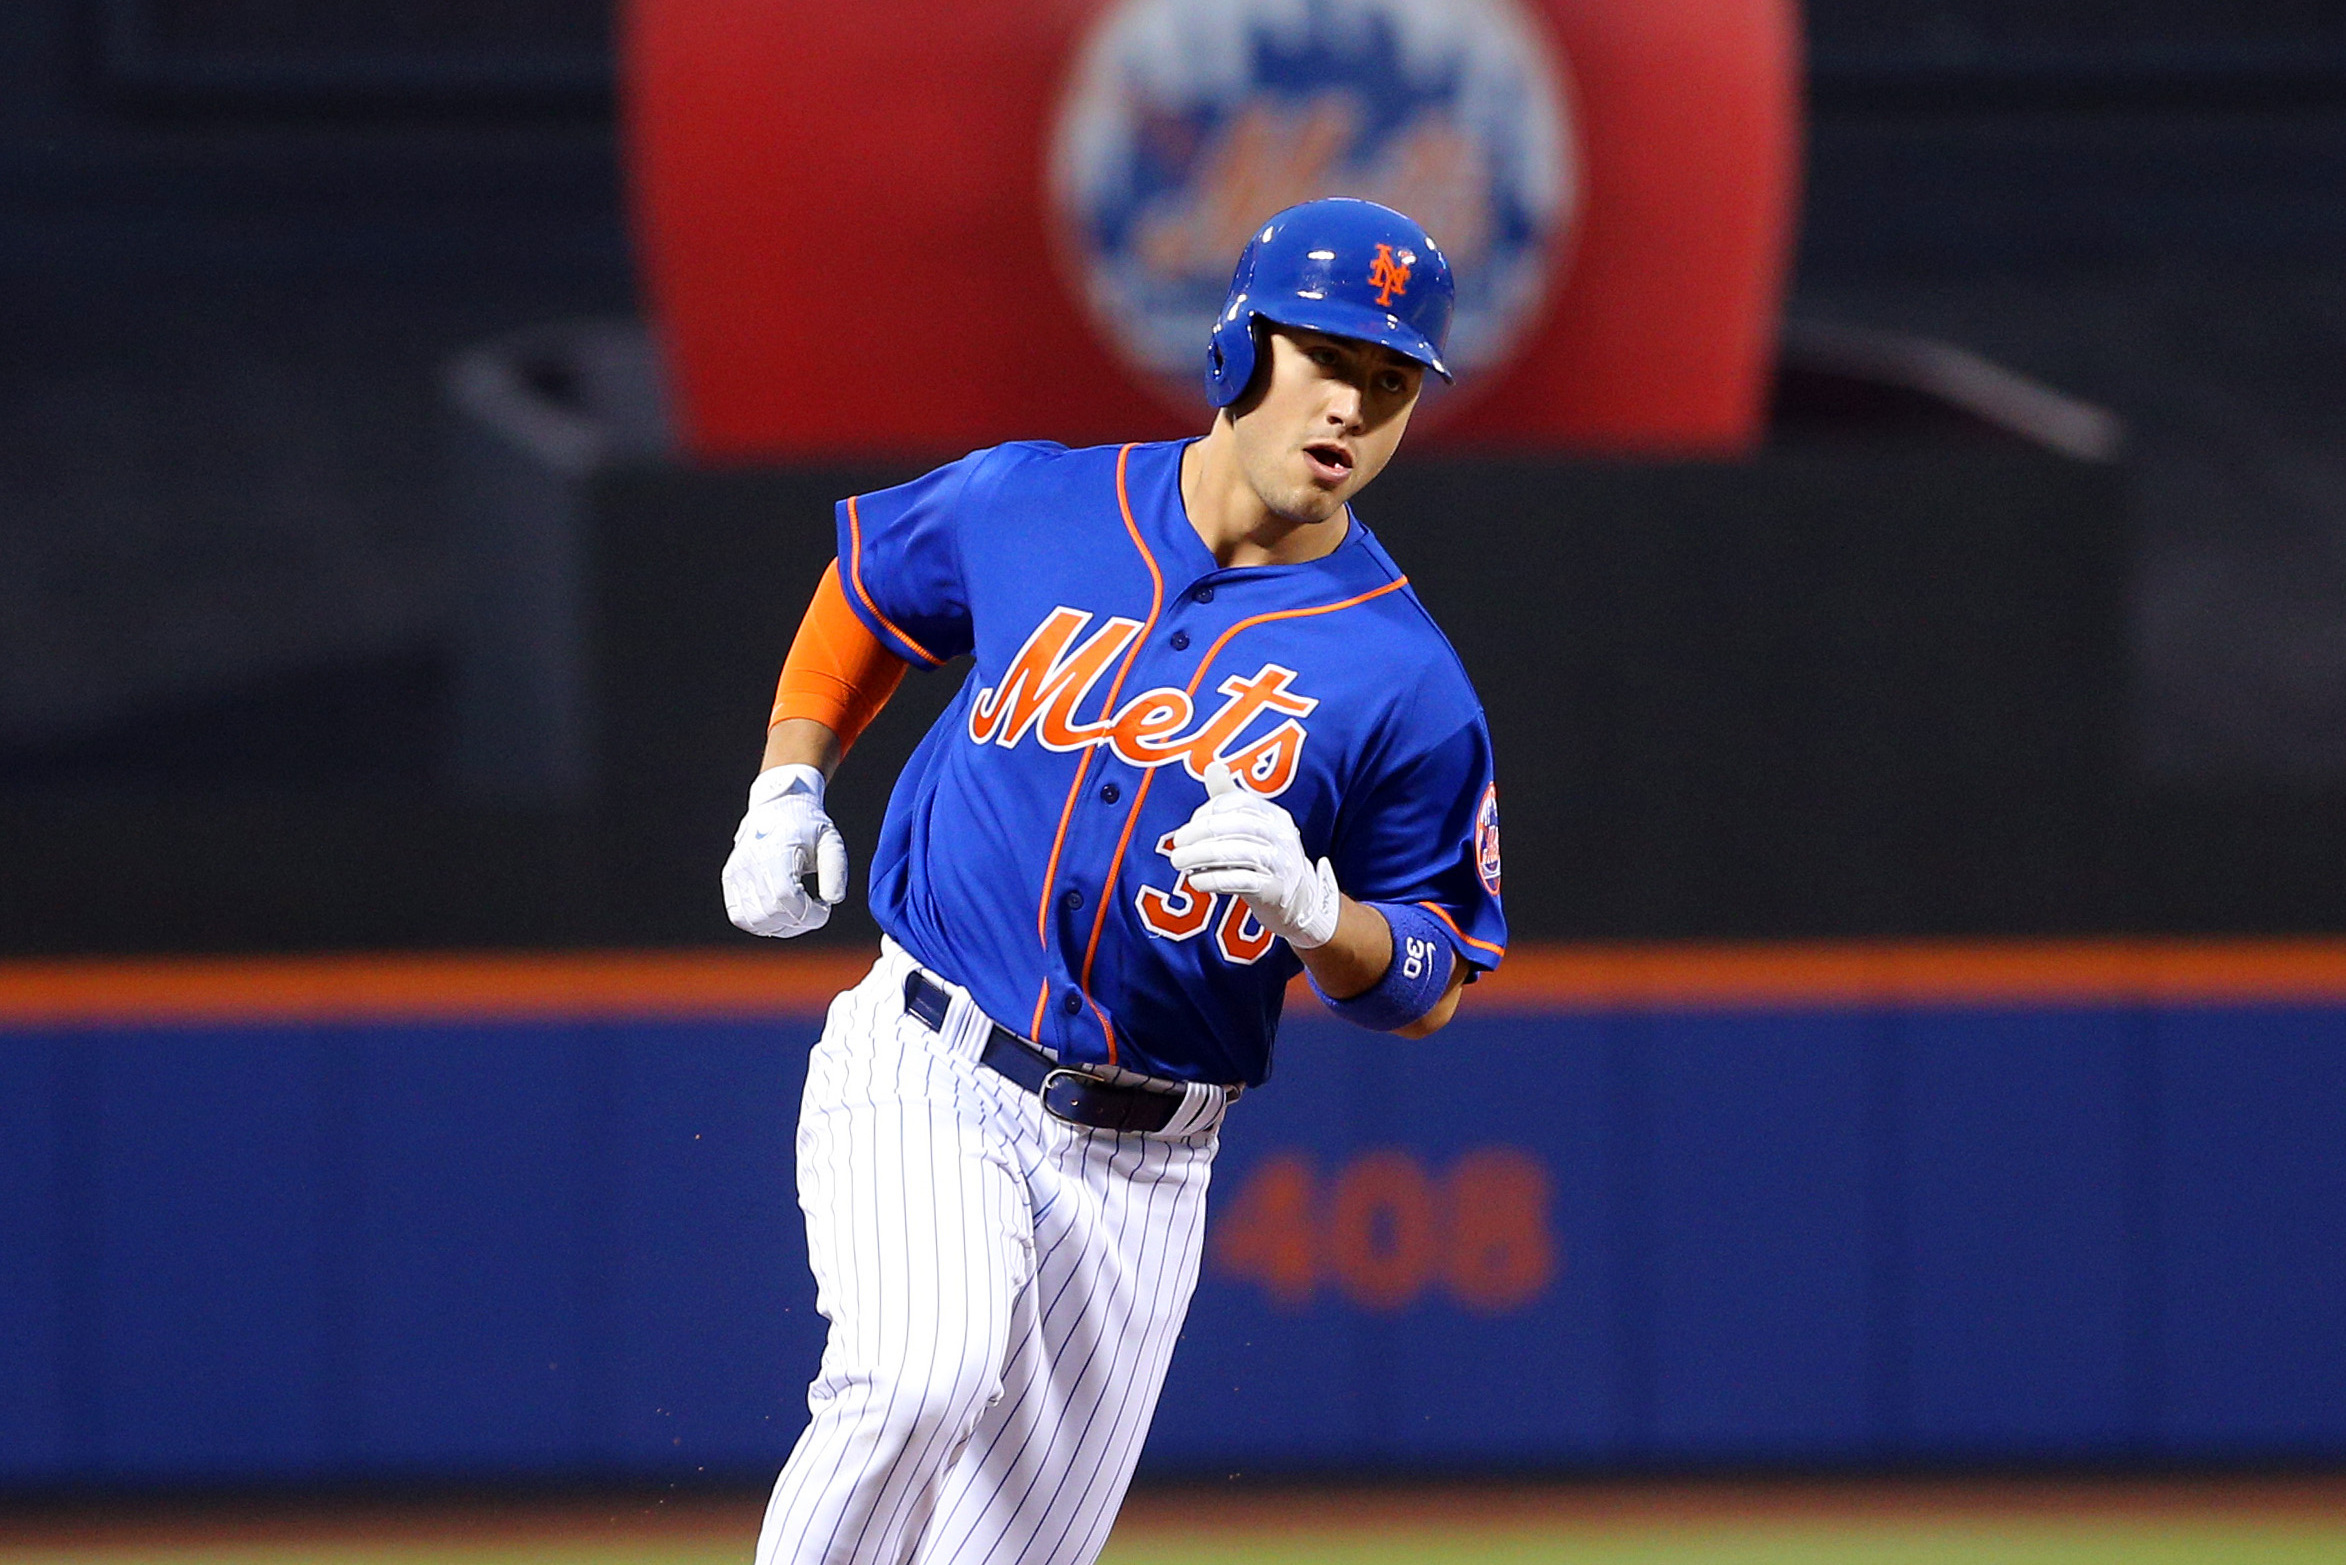 Michael Conforto Emerging as Homegrown Leader for Retooled Mets